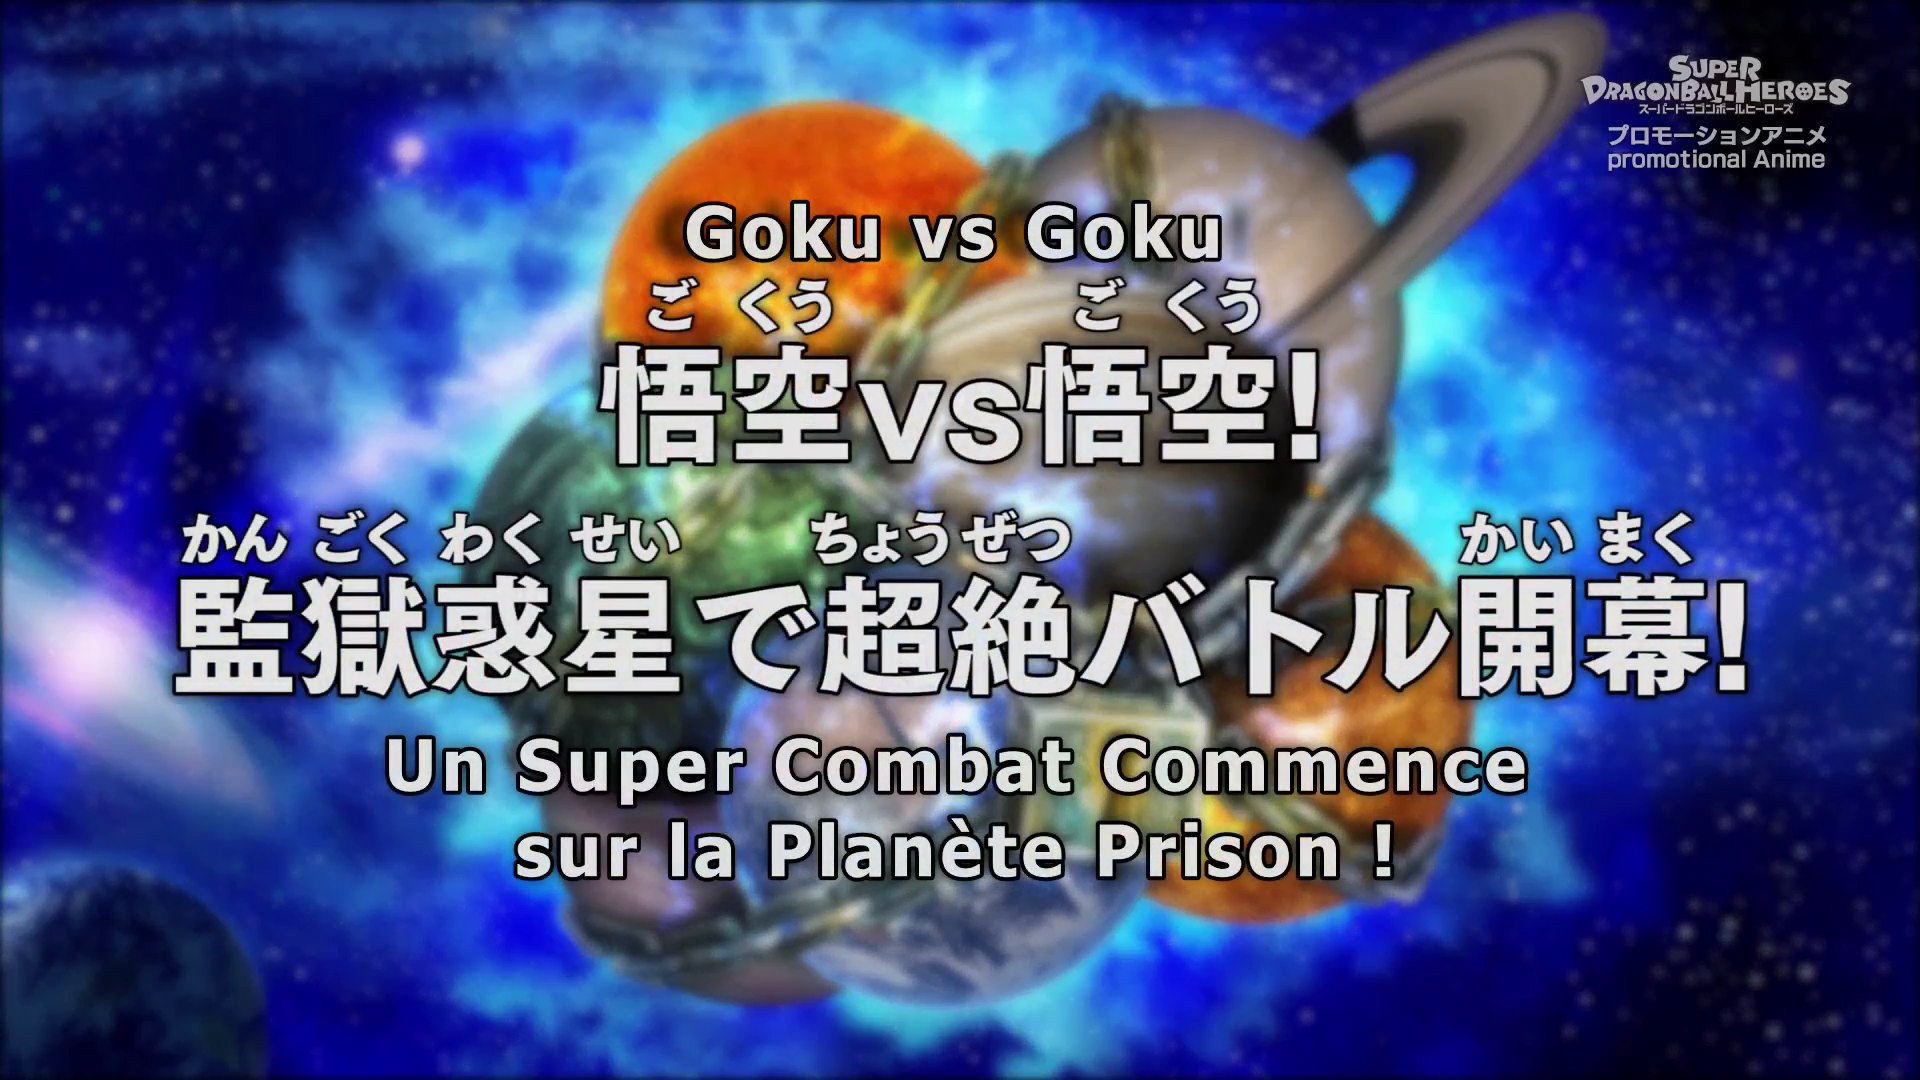 Fansub - Super Dragon Ball Heroes Episode 1 + Opening